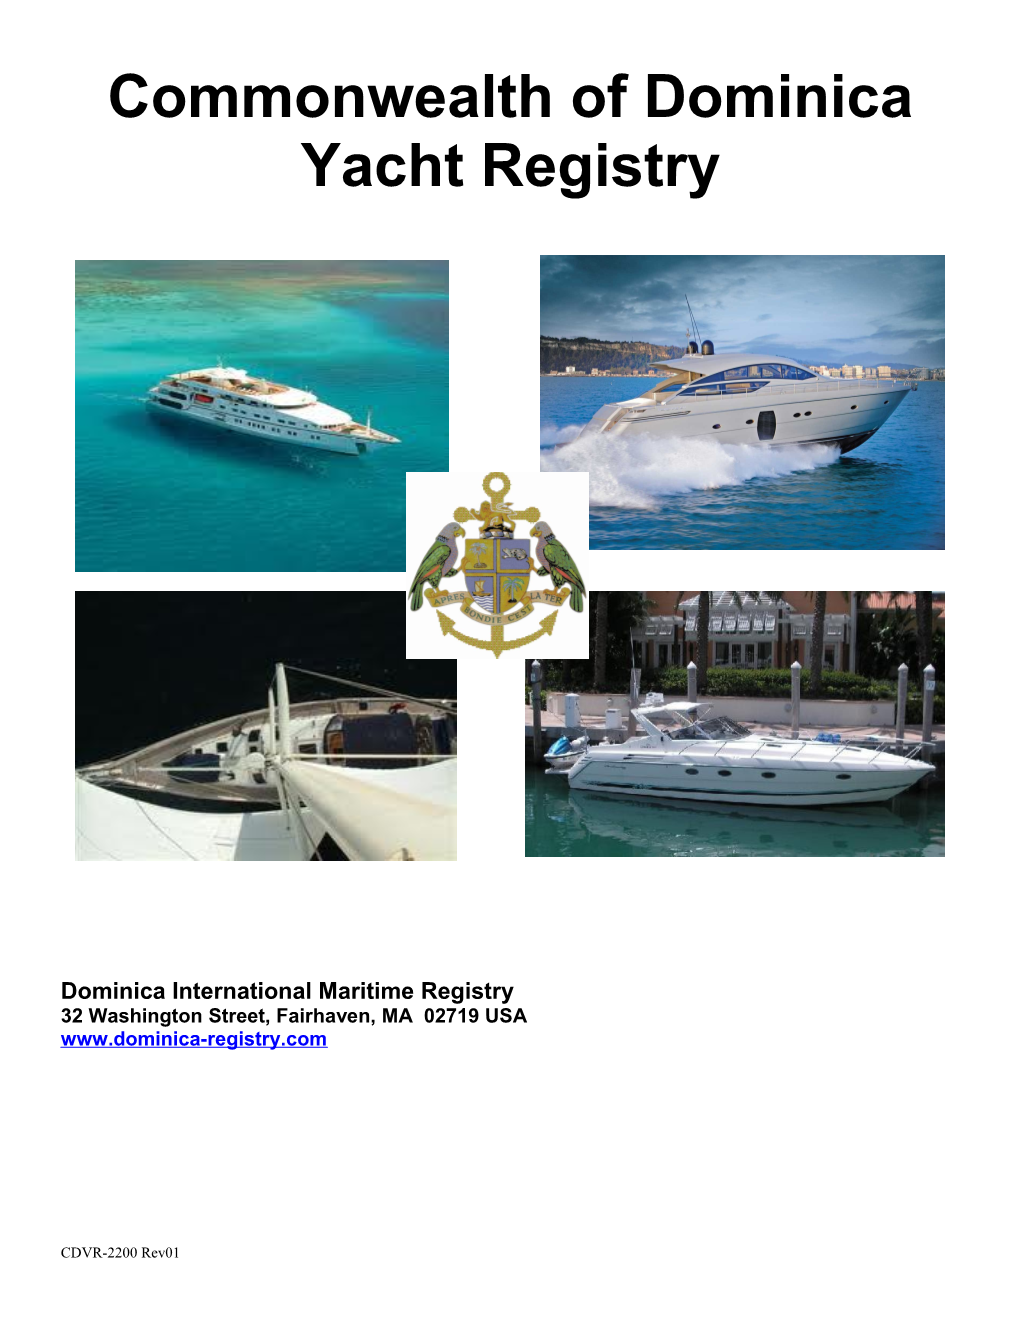 Requirements for Registration on Private/Pleasure Yachts